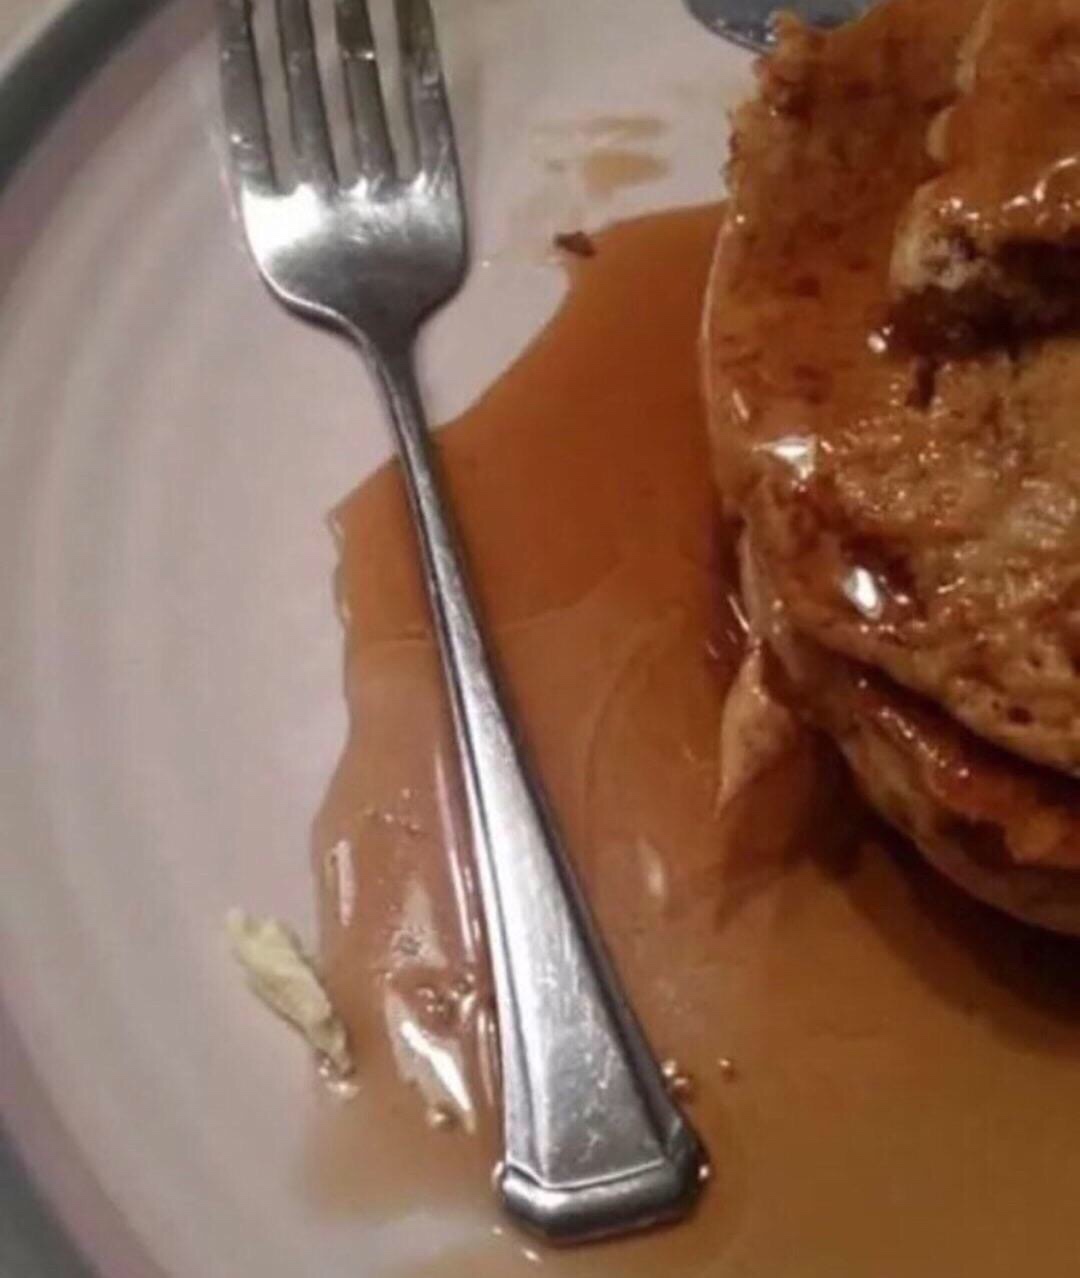 cursed image of fork that fell in the syrup of your dessert